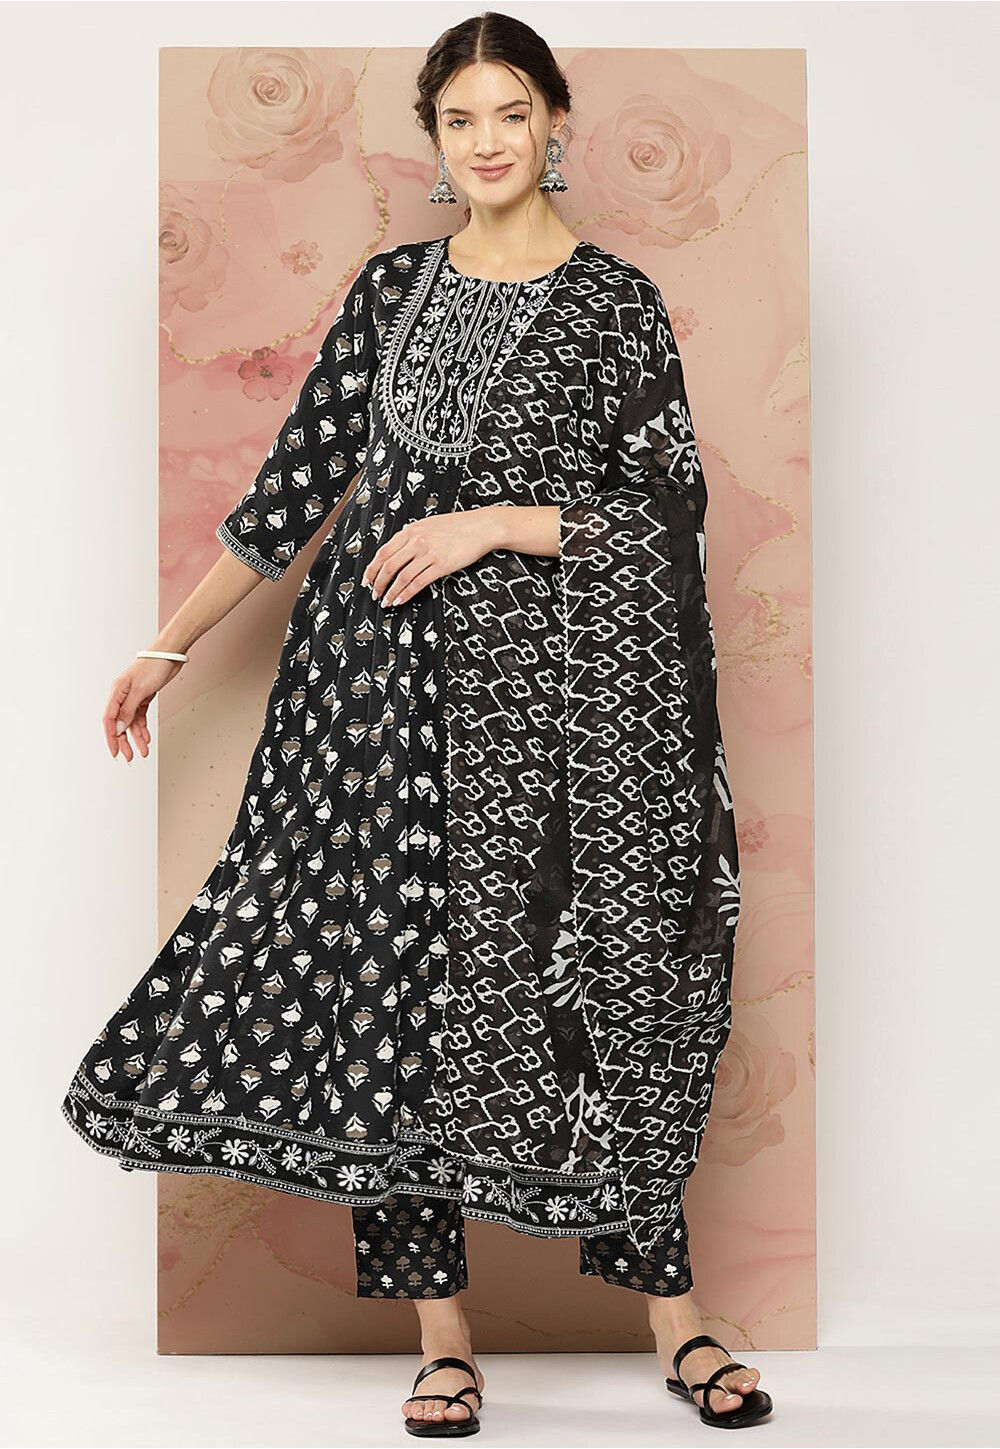 Printed Viscose Rayon A Line Suit in Black : KXN34